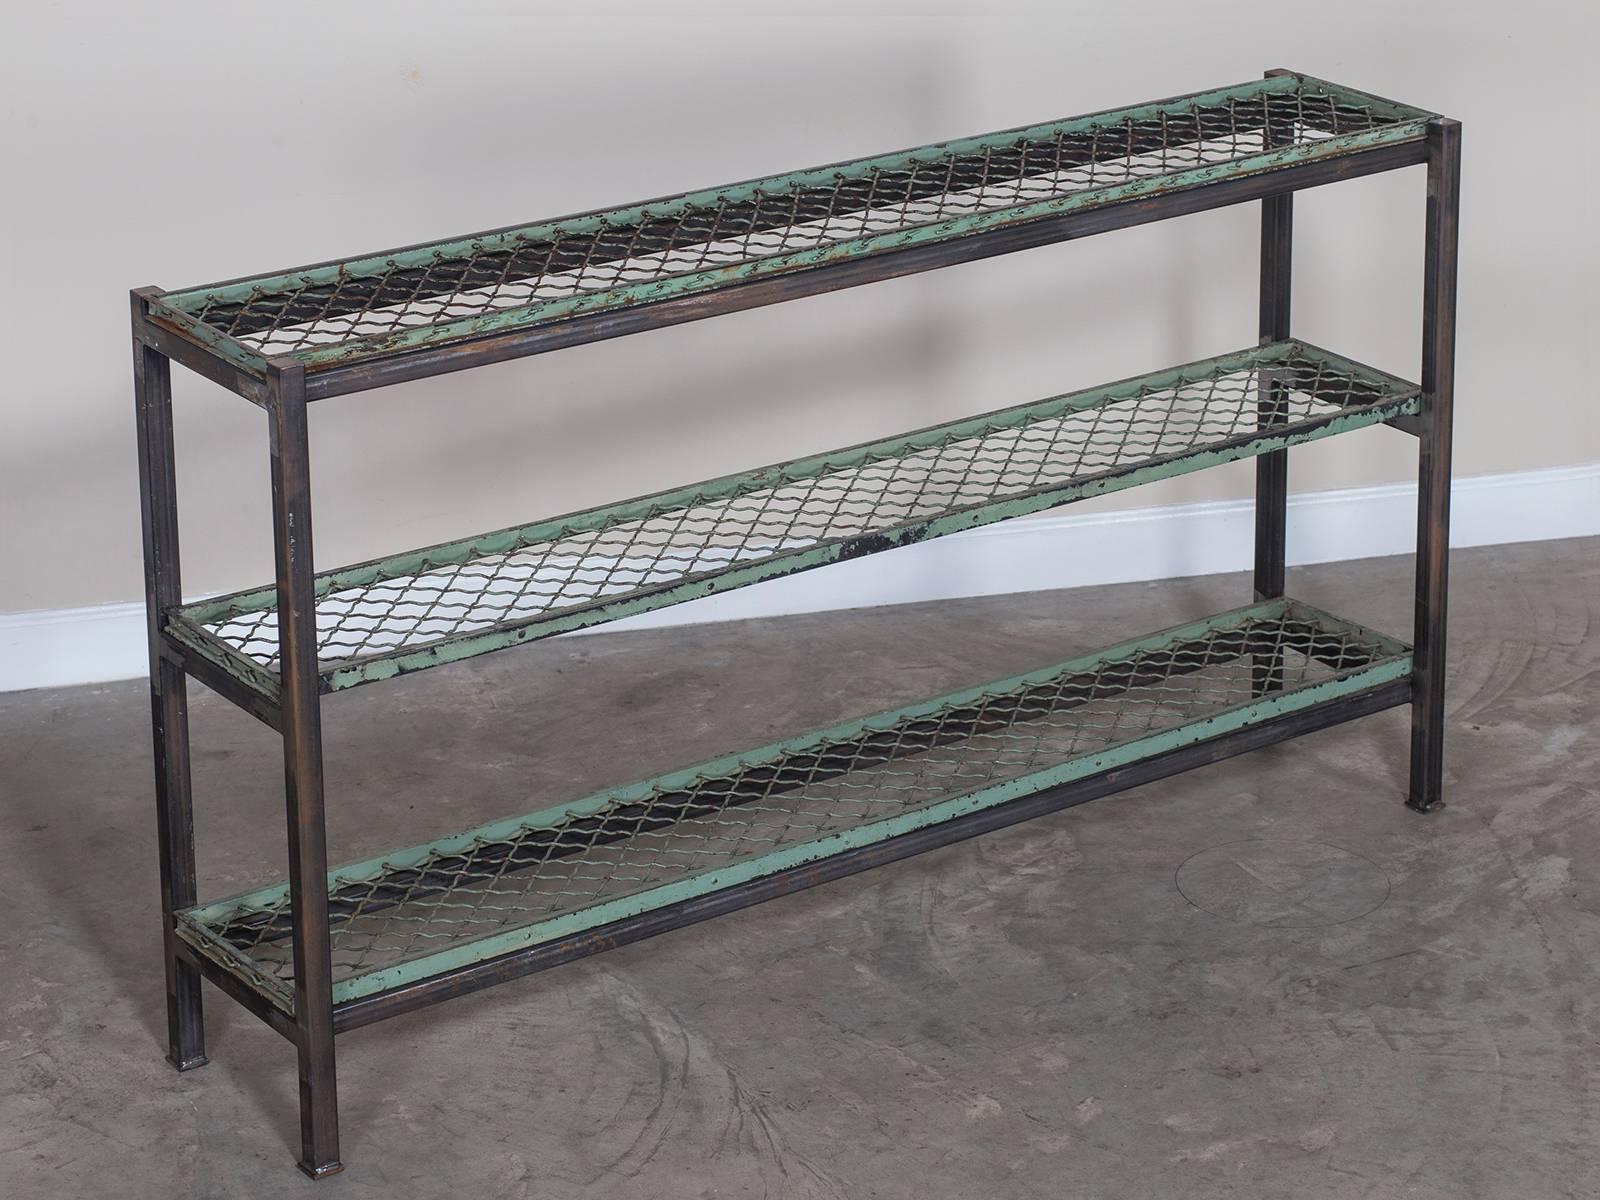 Receive our new selections direct from 1stdibs by email each week. Please click “Follow Dealer” button below and see them first!

A unique serving table display stand made of reclaimed vintage French painted metal shelves mounted on a custom steel